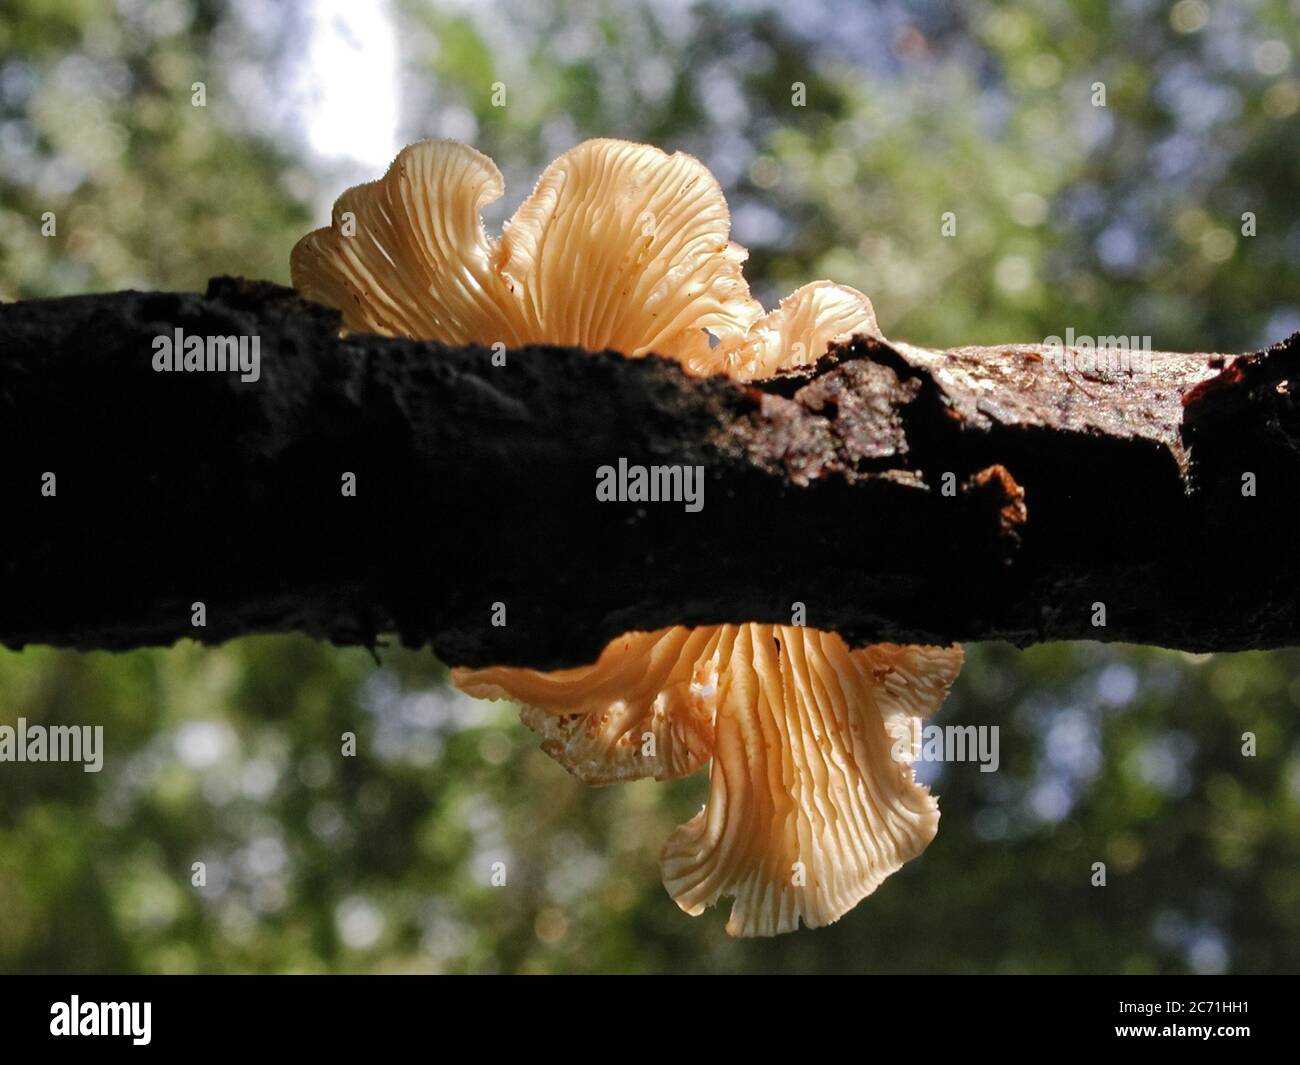 Mushrooms are a form of fungi found in natural settings around the world.  This one is found in a forested area of North Central Florida. Stock Photo